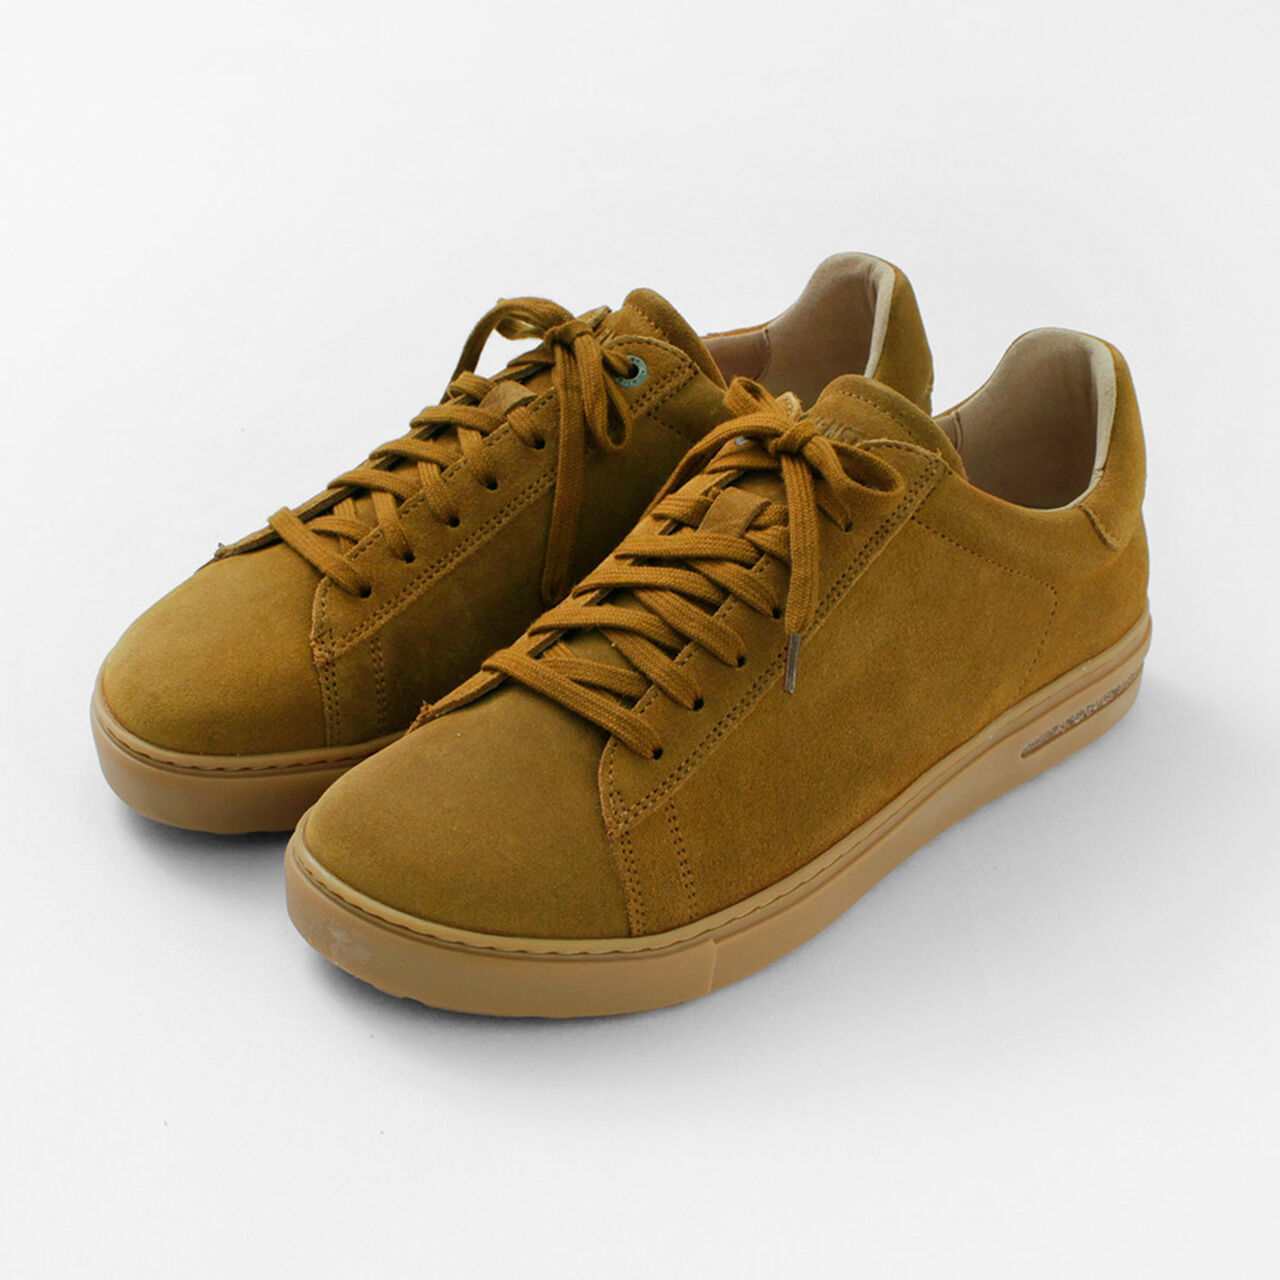 Bend Low / Suede Leather Velour Leather Leather Sneakers,Mink, large image number 0